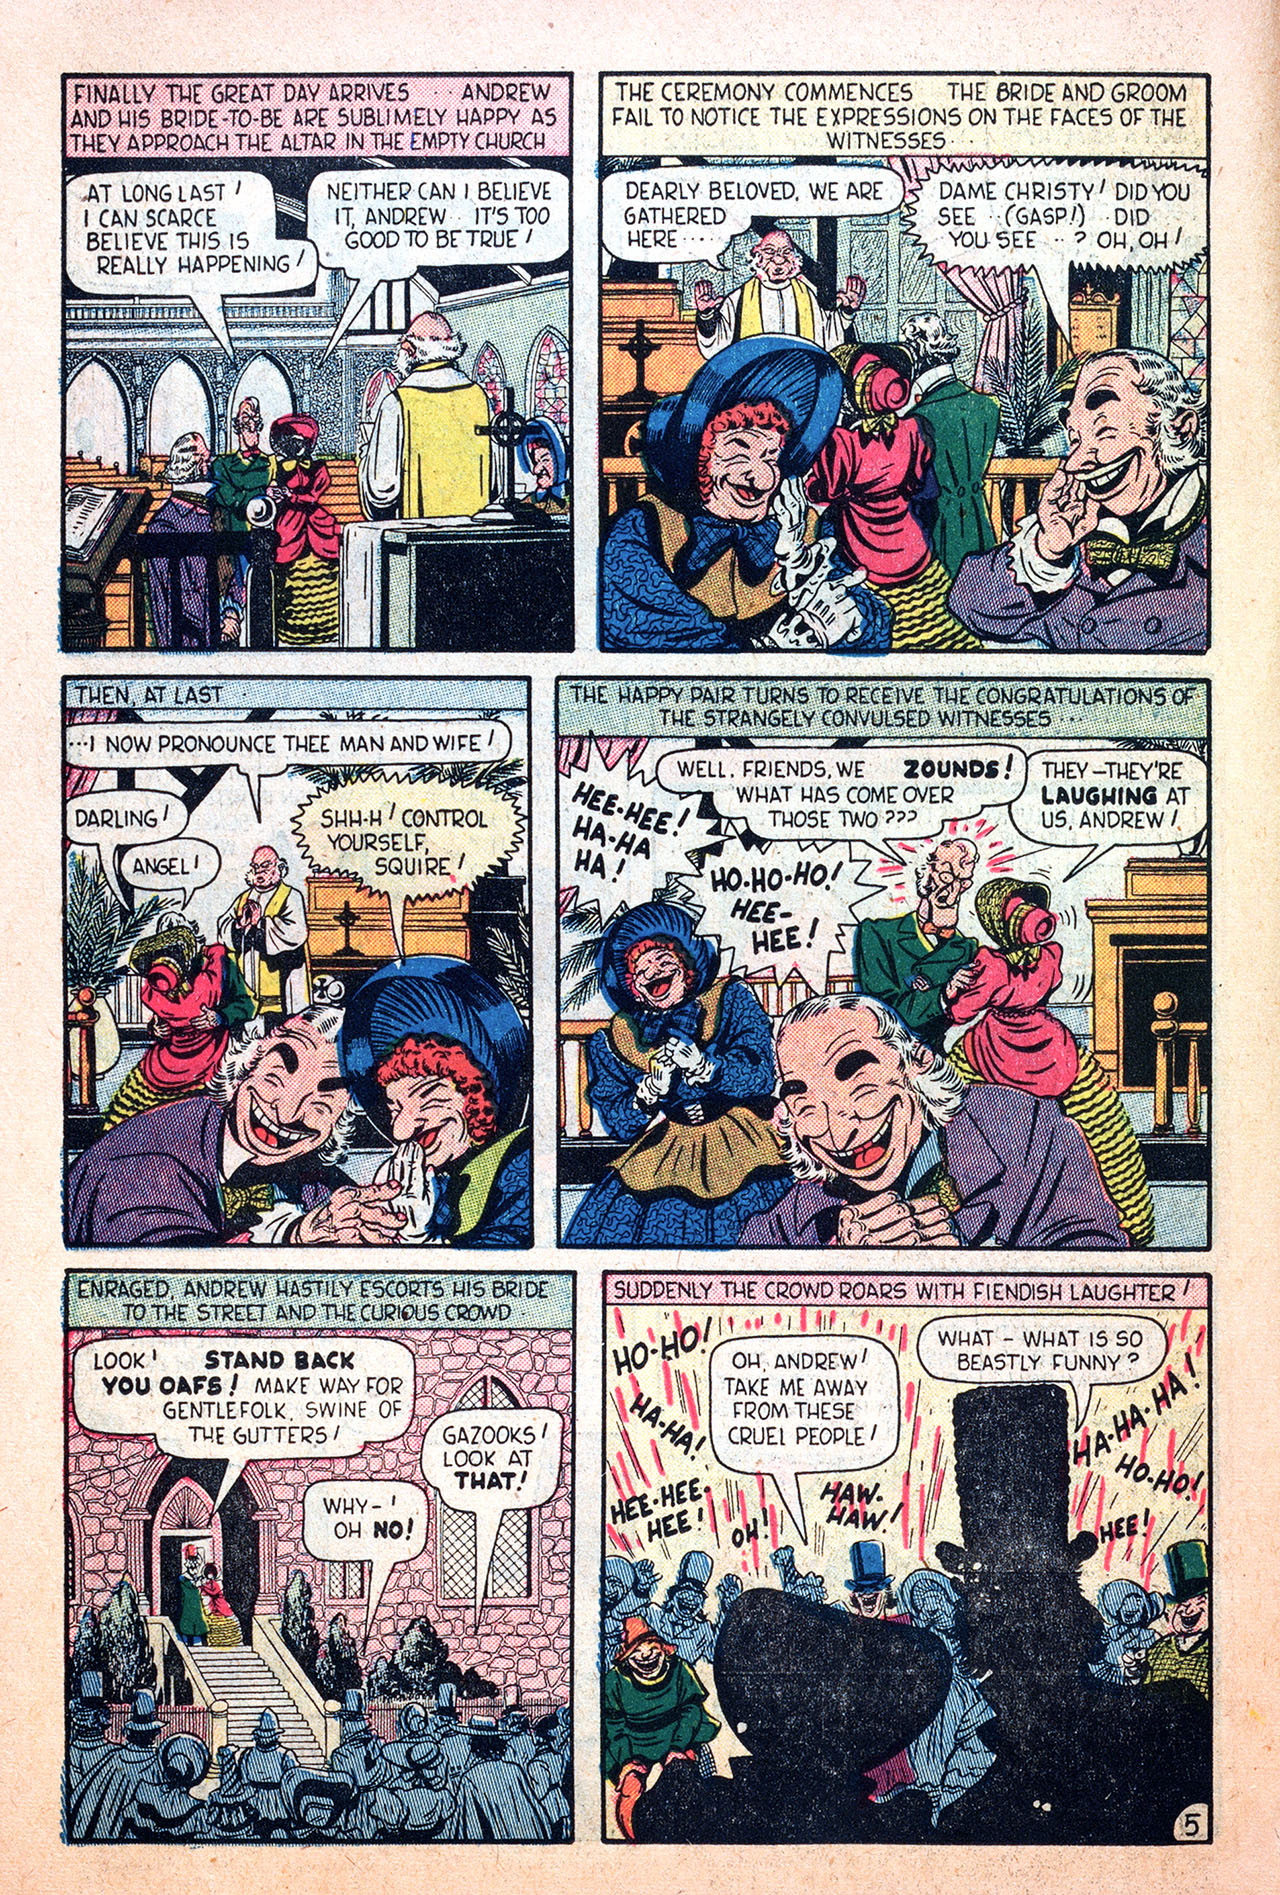 Marvel Tales (1949) 94 Page 13